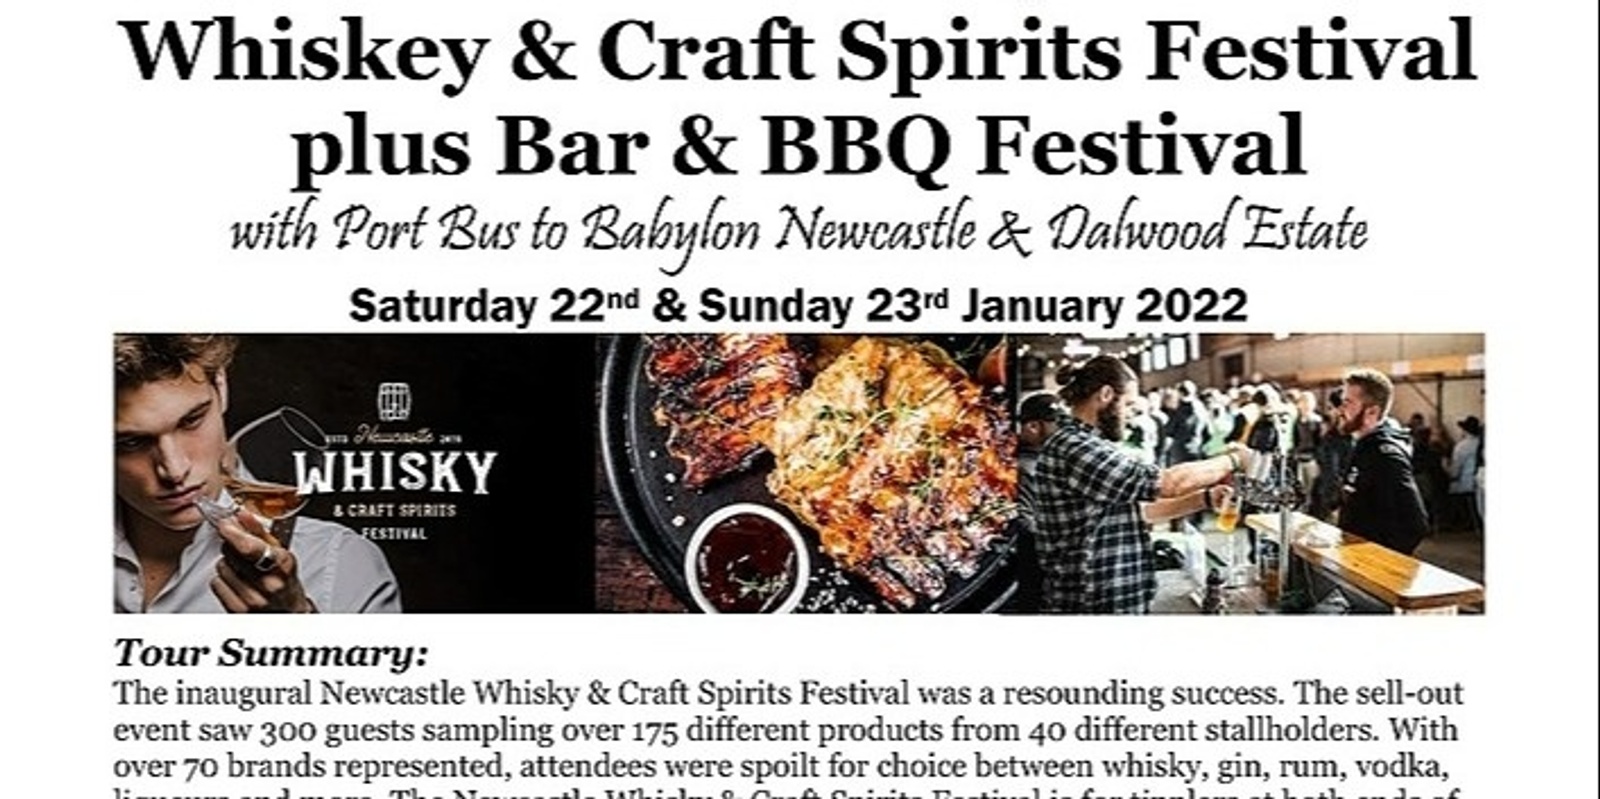 Banner image for Whiskey & Craft Spirits Festival + Bar & BBQ Festival with Port Bus